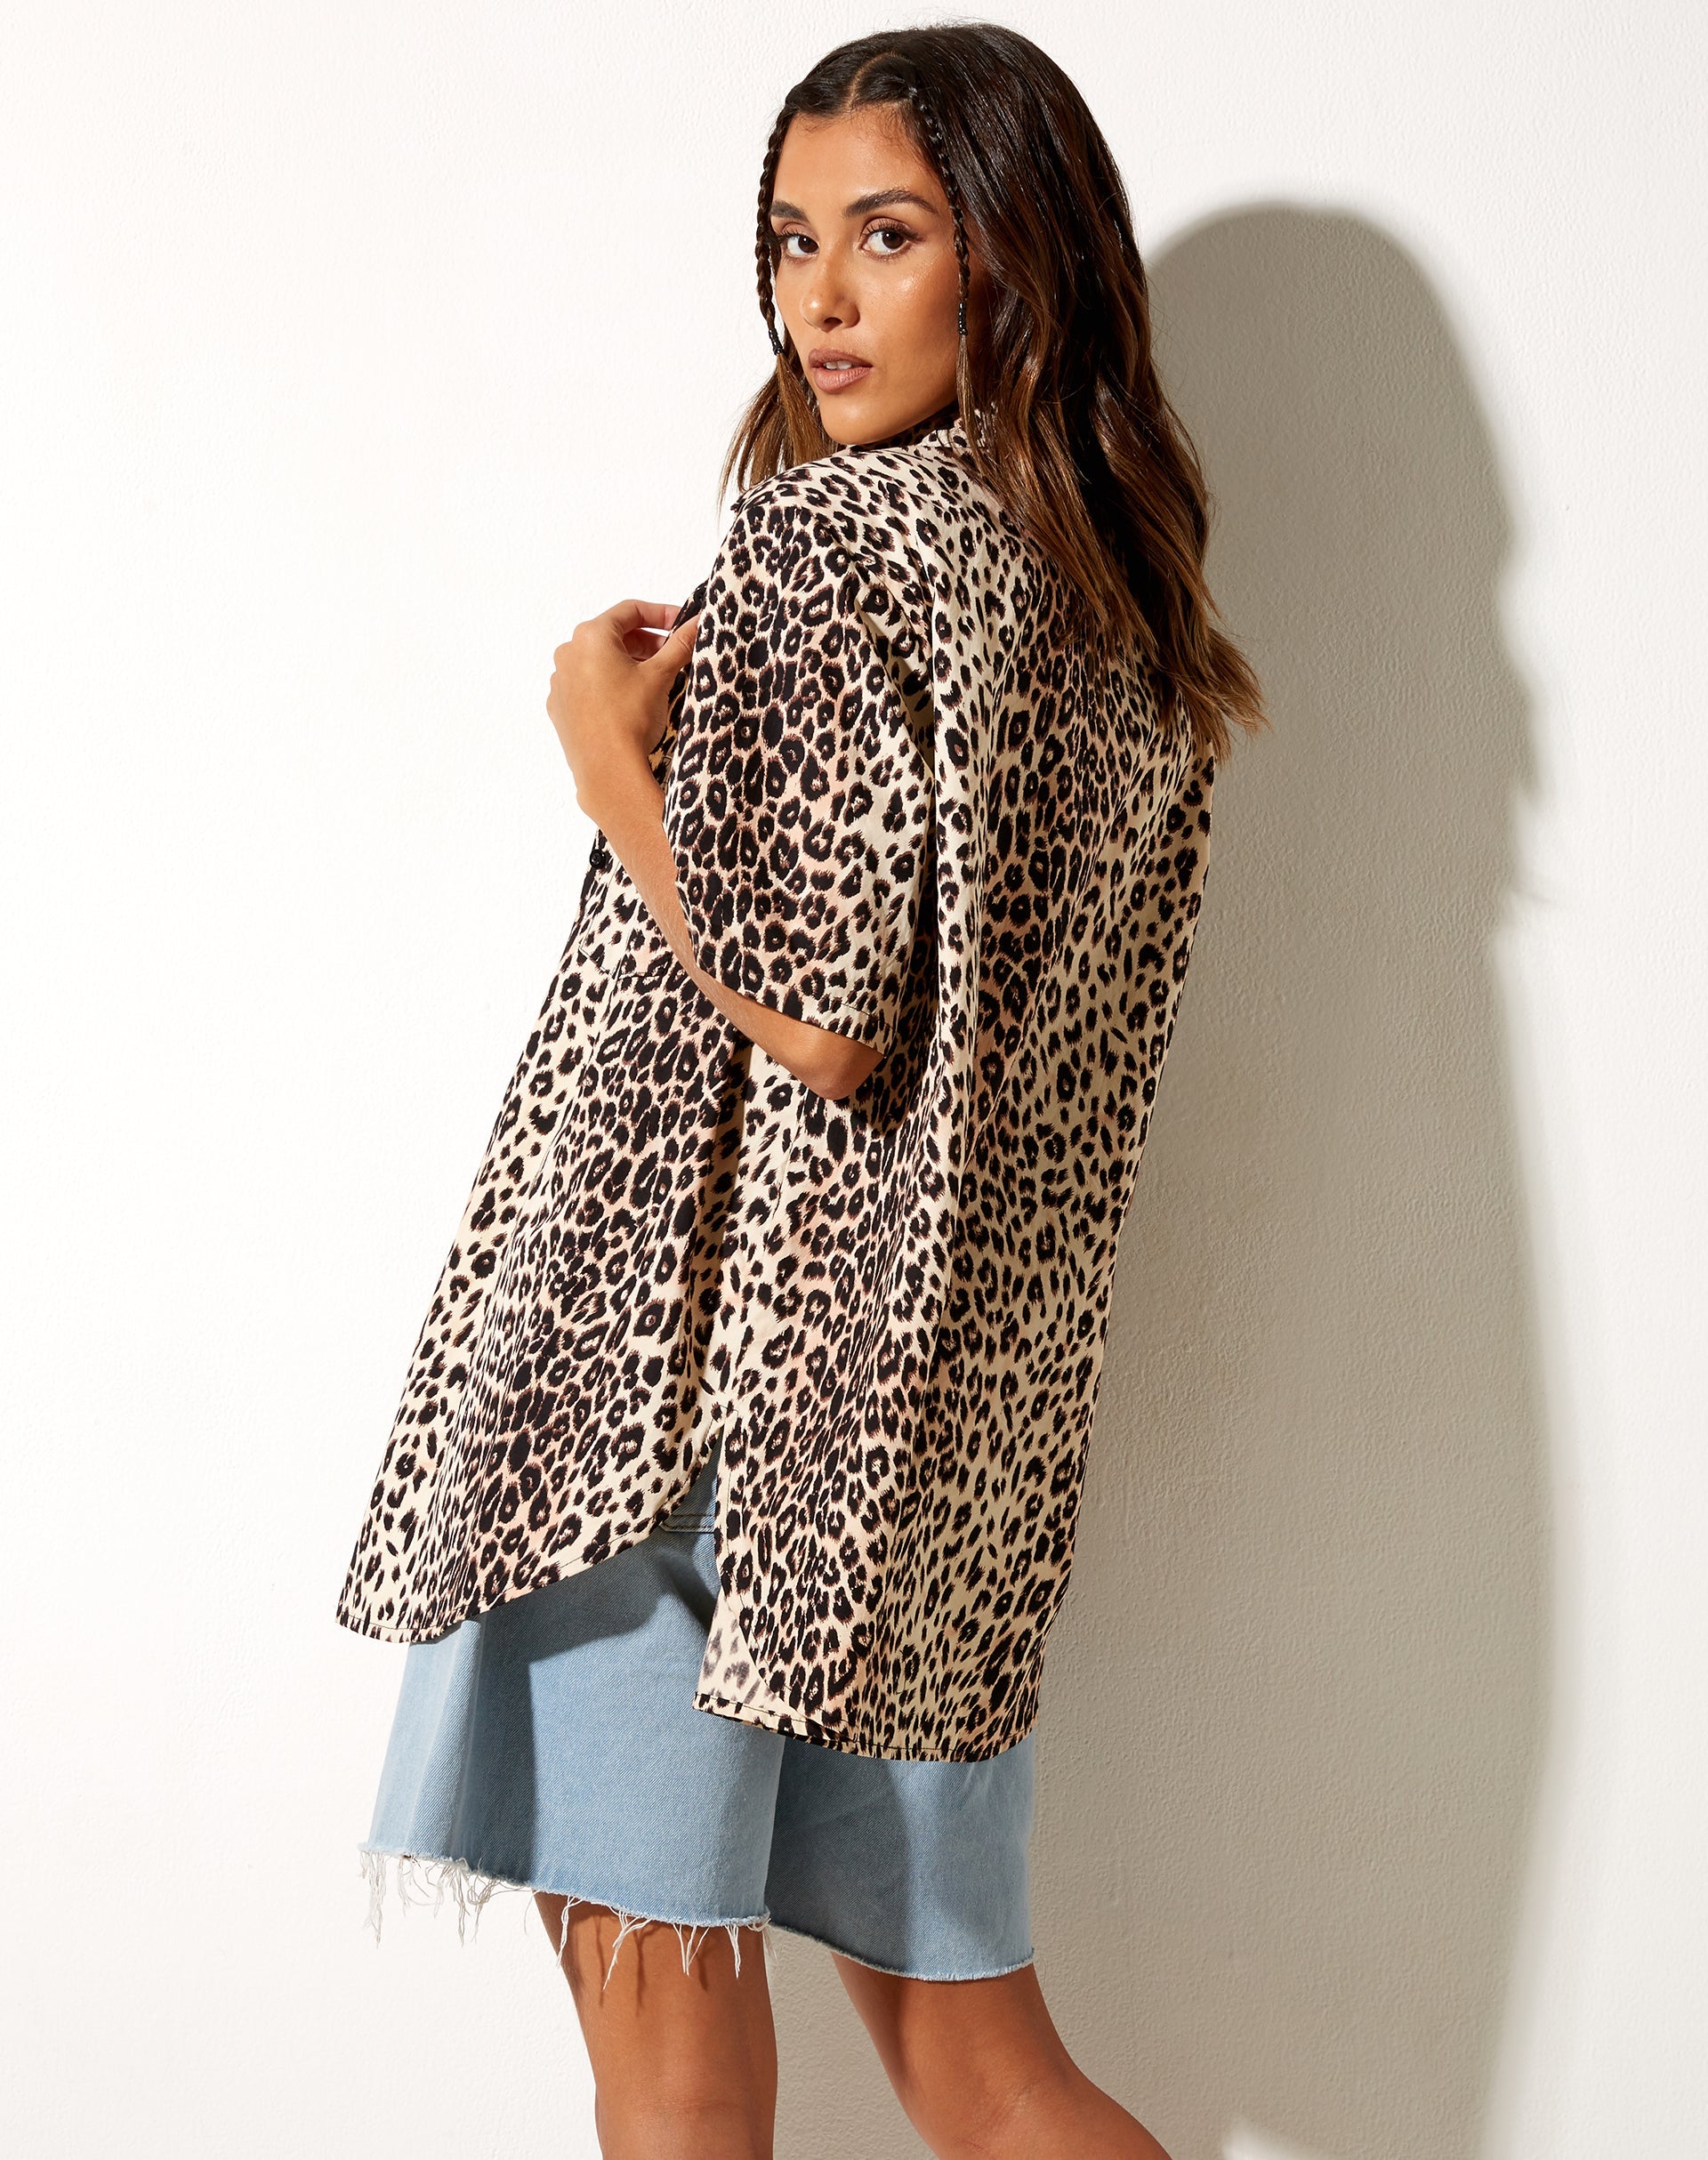 Image of Smith Short Sleeve Shirt in True Leopard